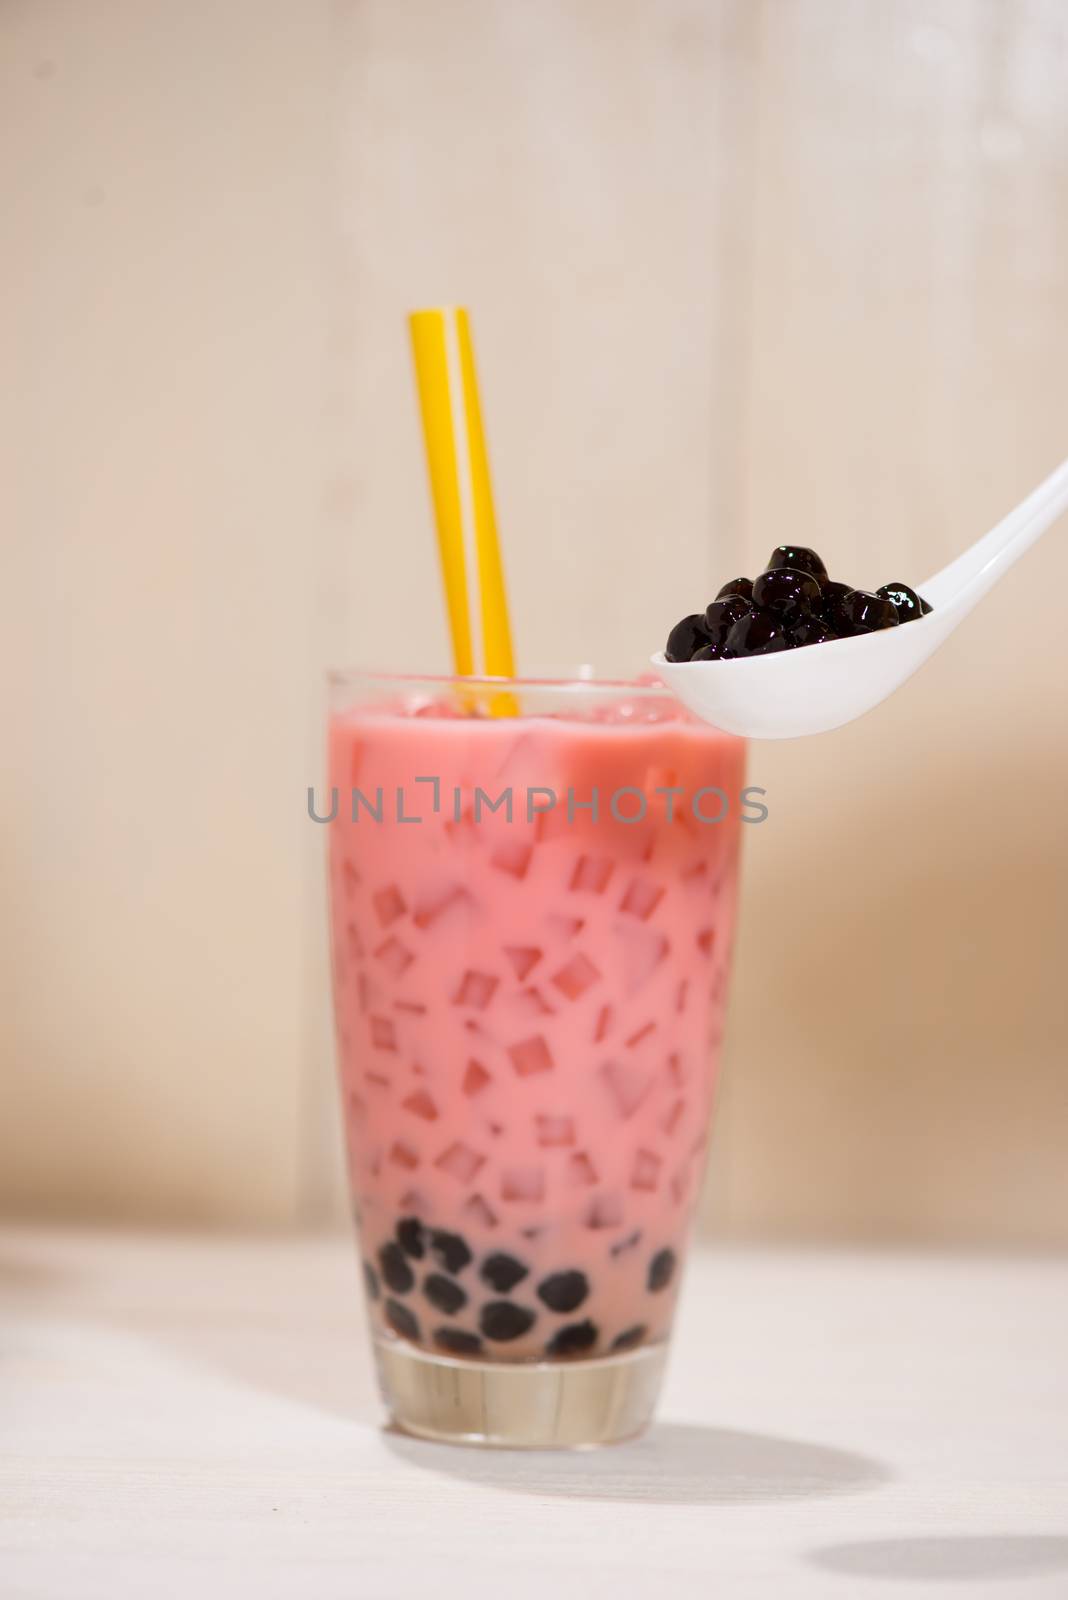 Boba / Bubble tea. Homemade Strawberry Milk Tea with Pearls on w by makidotvn